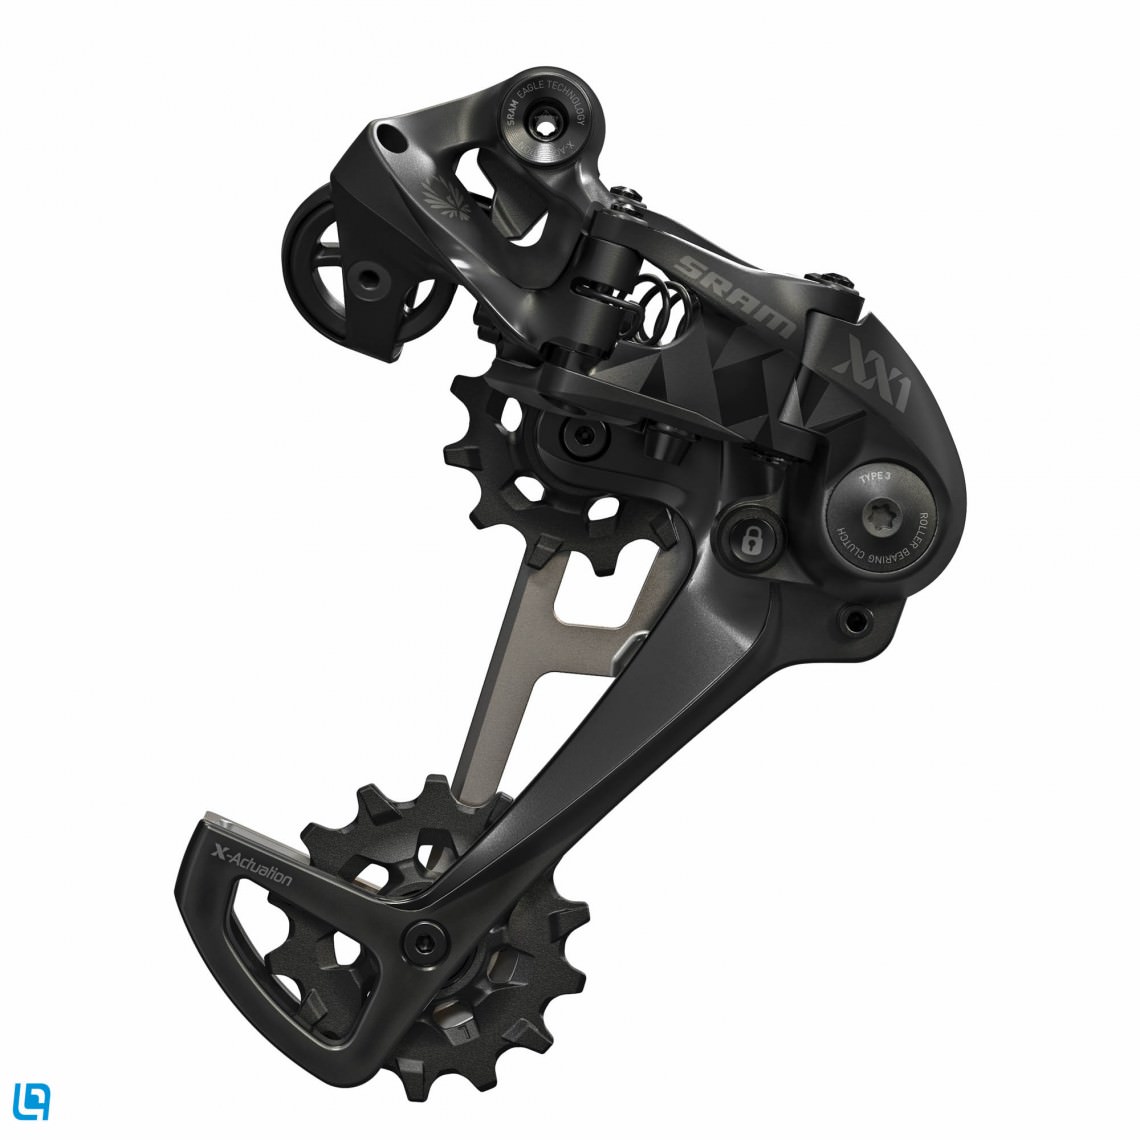 The XO1 derailleur is targeted at trail and enduro riders.